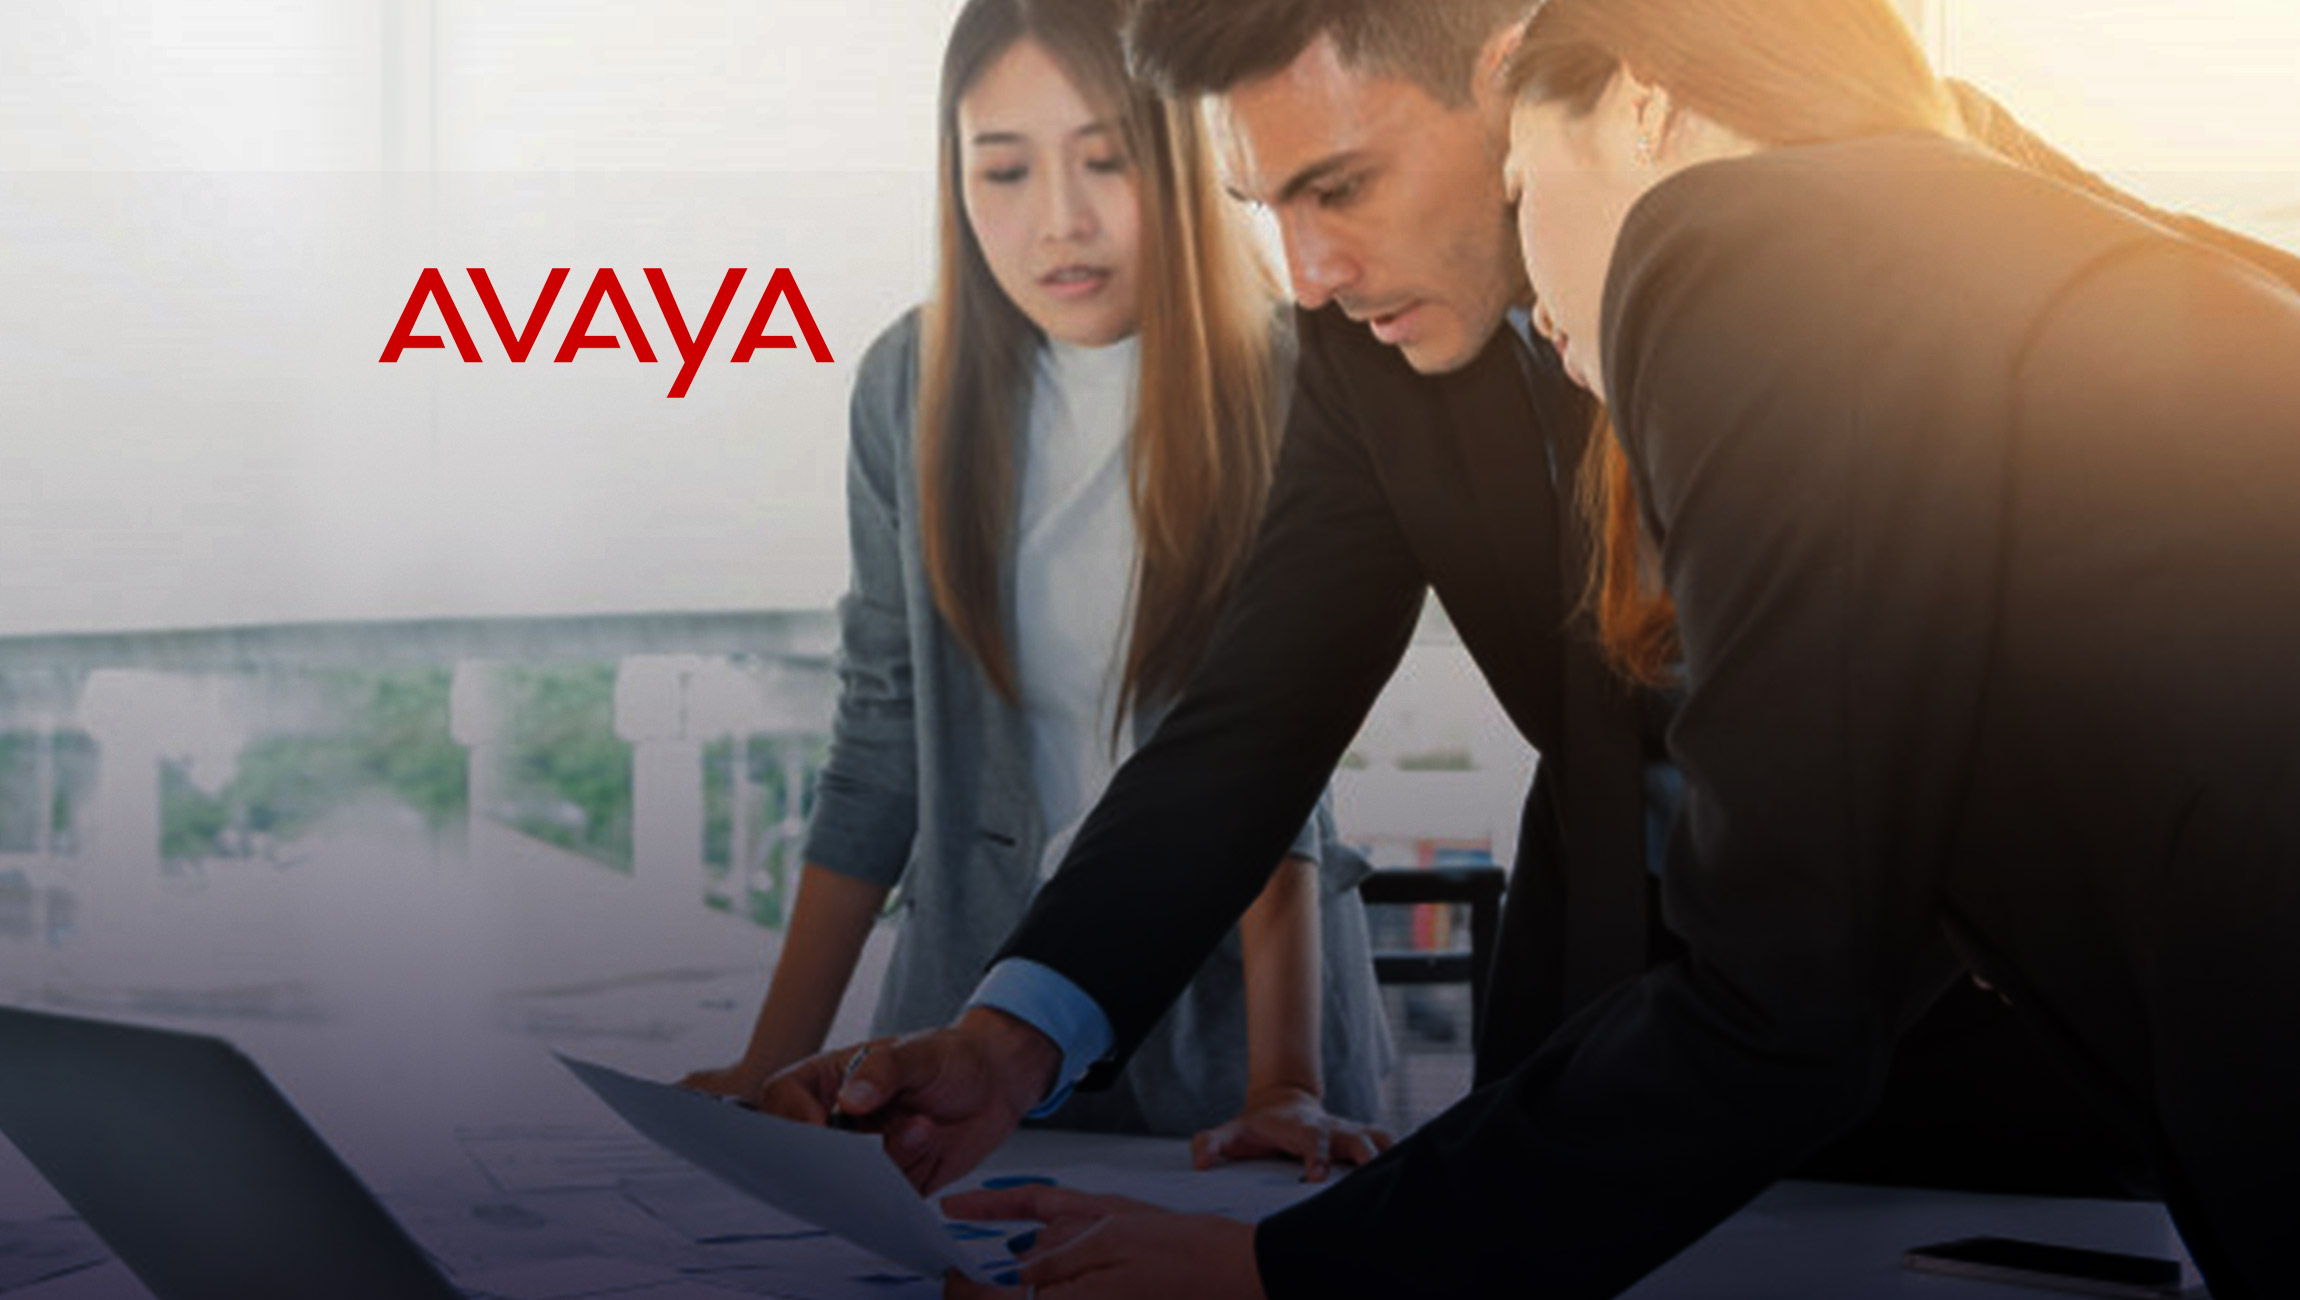 Avaya Honored for Exceptional Innovation in Customer Experience Solutions, Empowering Contact Centers with Advanced AI and Natural Language Processing Capabilities